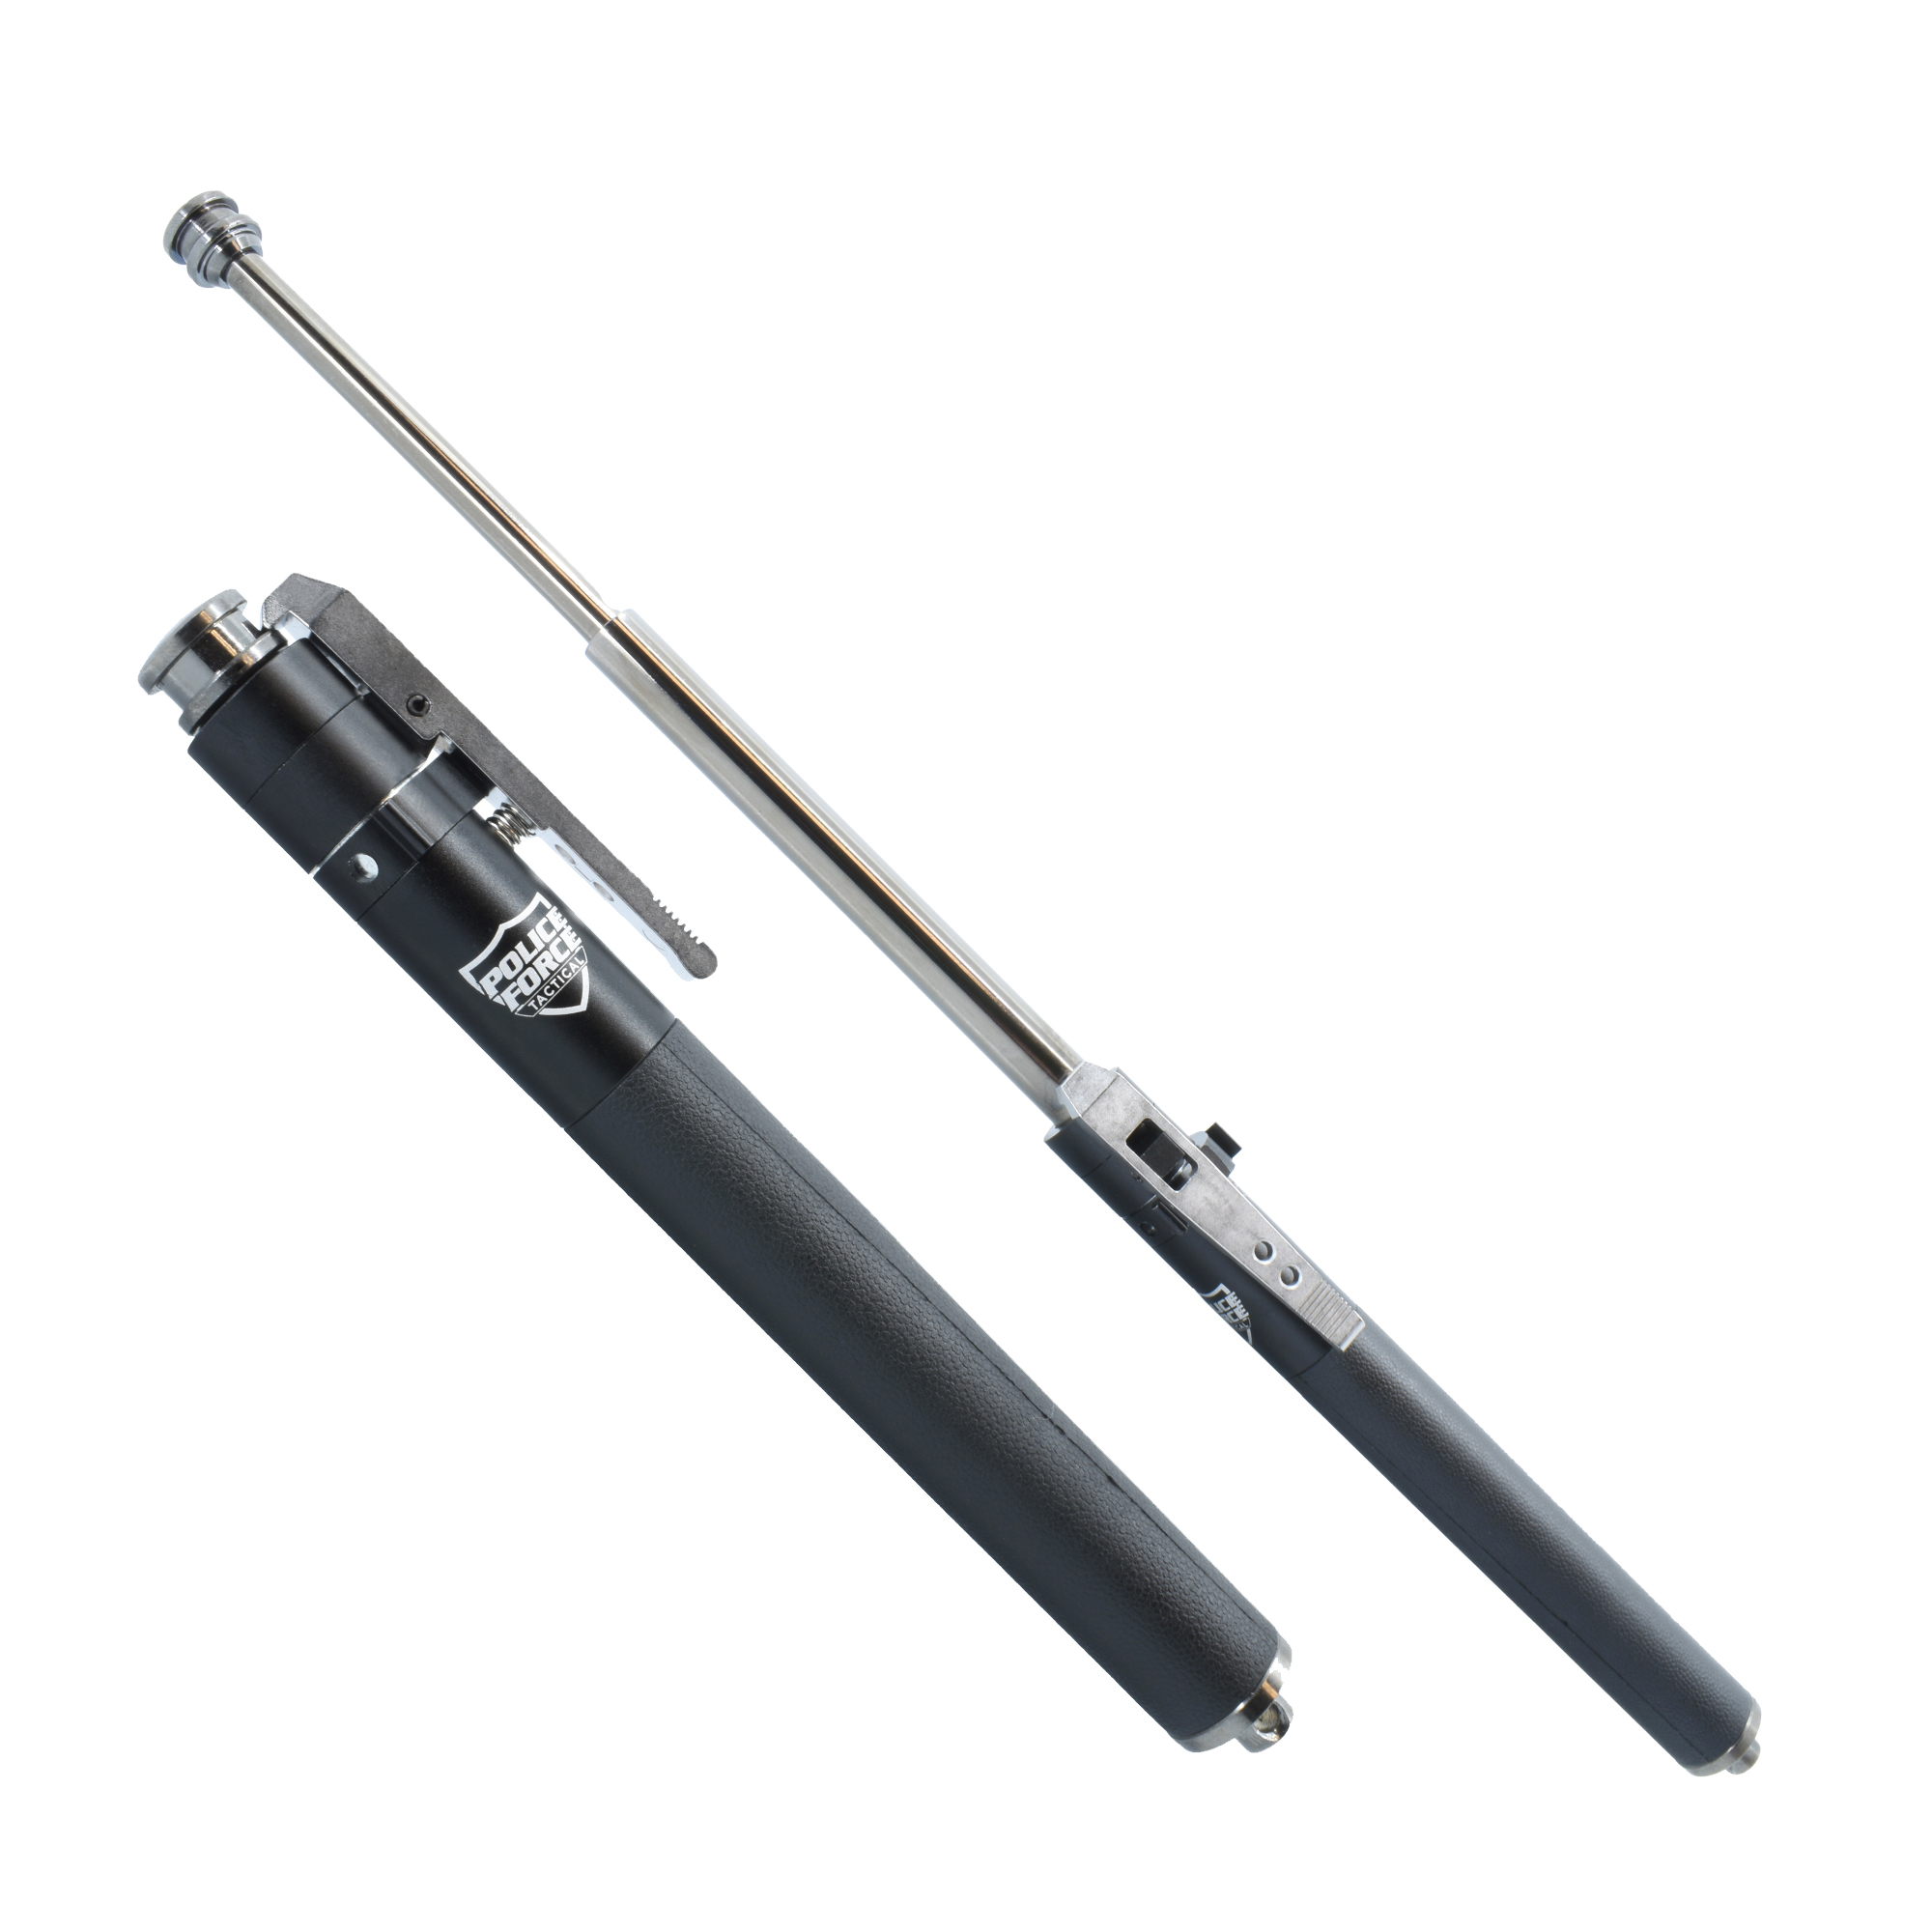 POLICE FORCE 16 NEXT GENERATION AUTOMATIC EXPANDABLE STEEL BATON